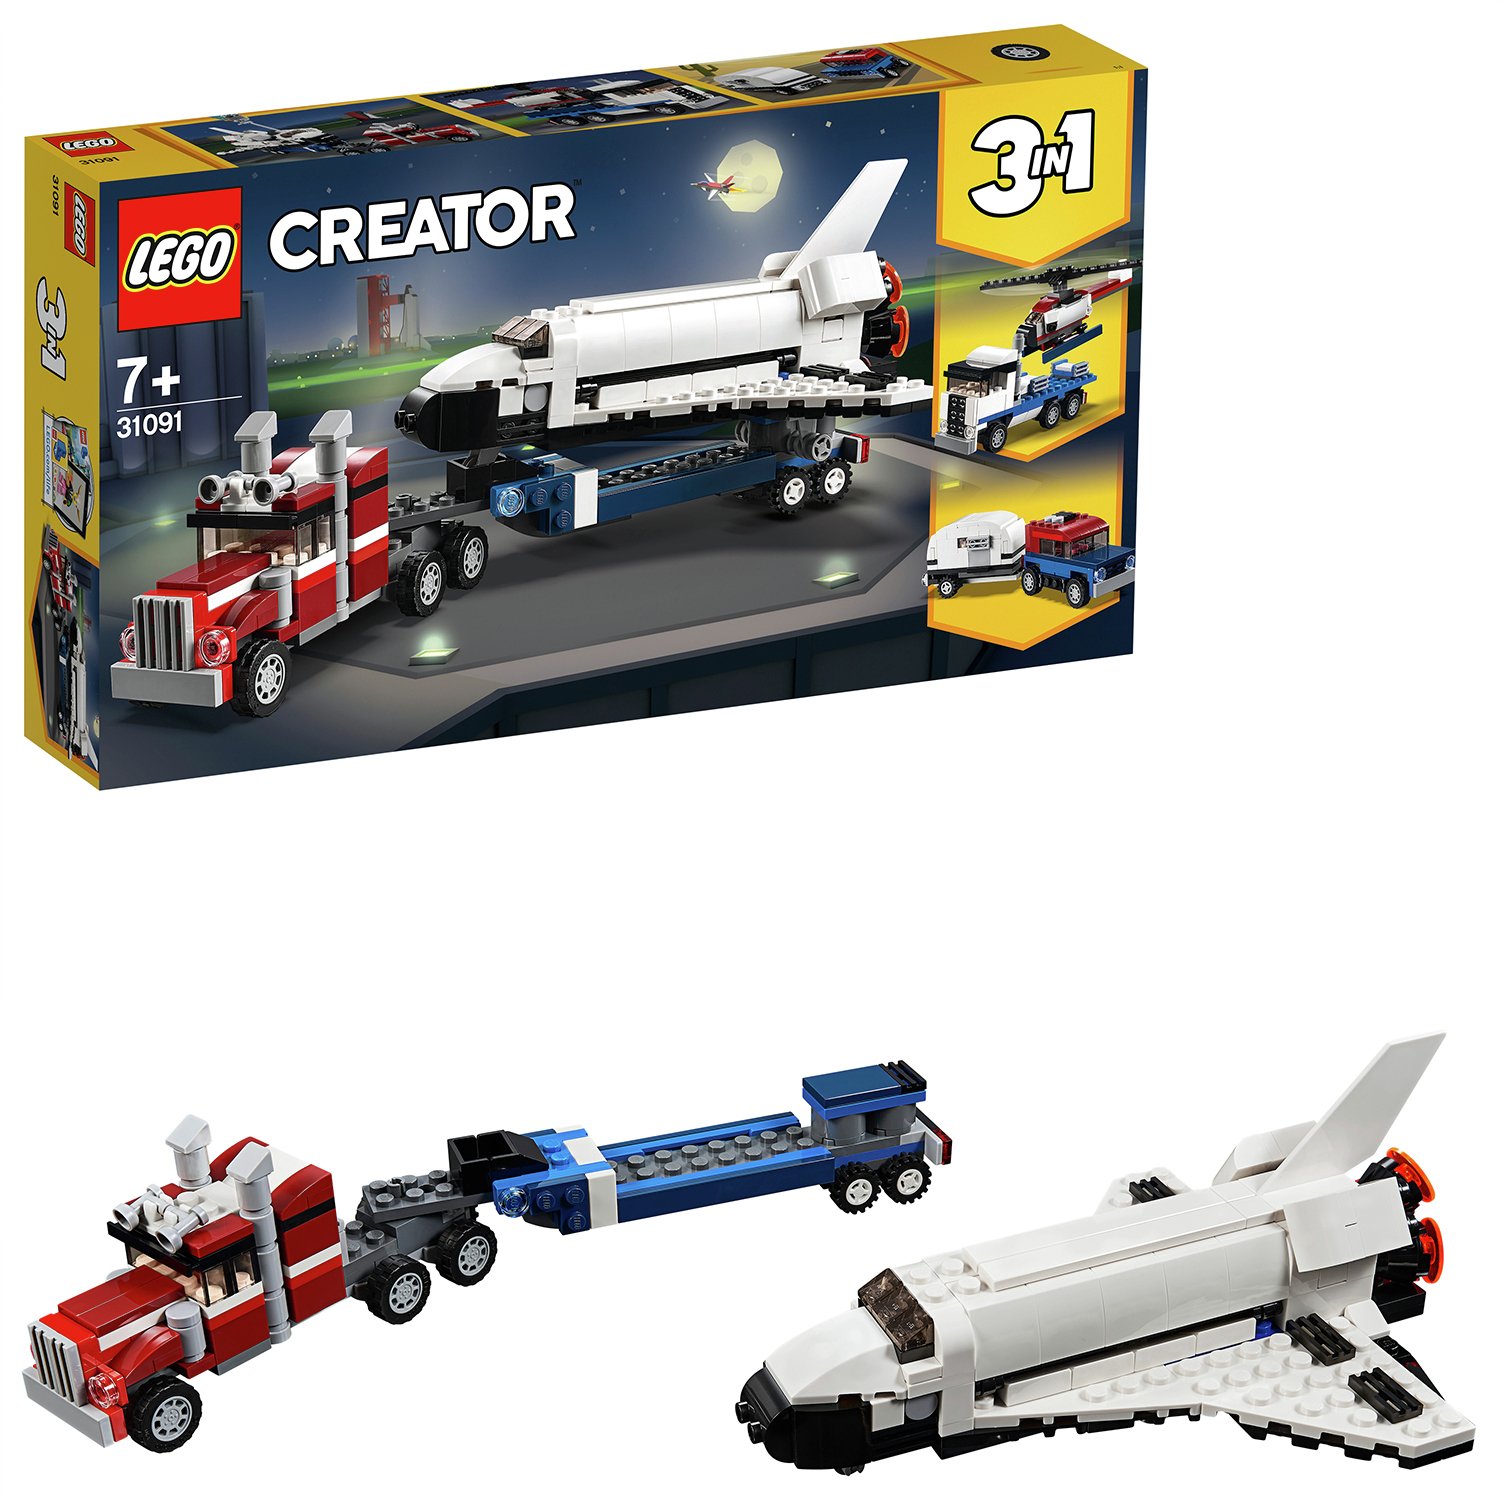 LEGO Creator 3-in-1 Shuttle Transporter Building Set Review